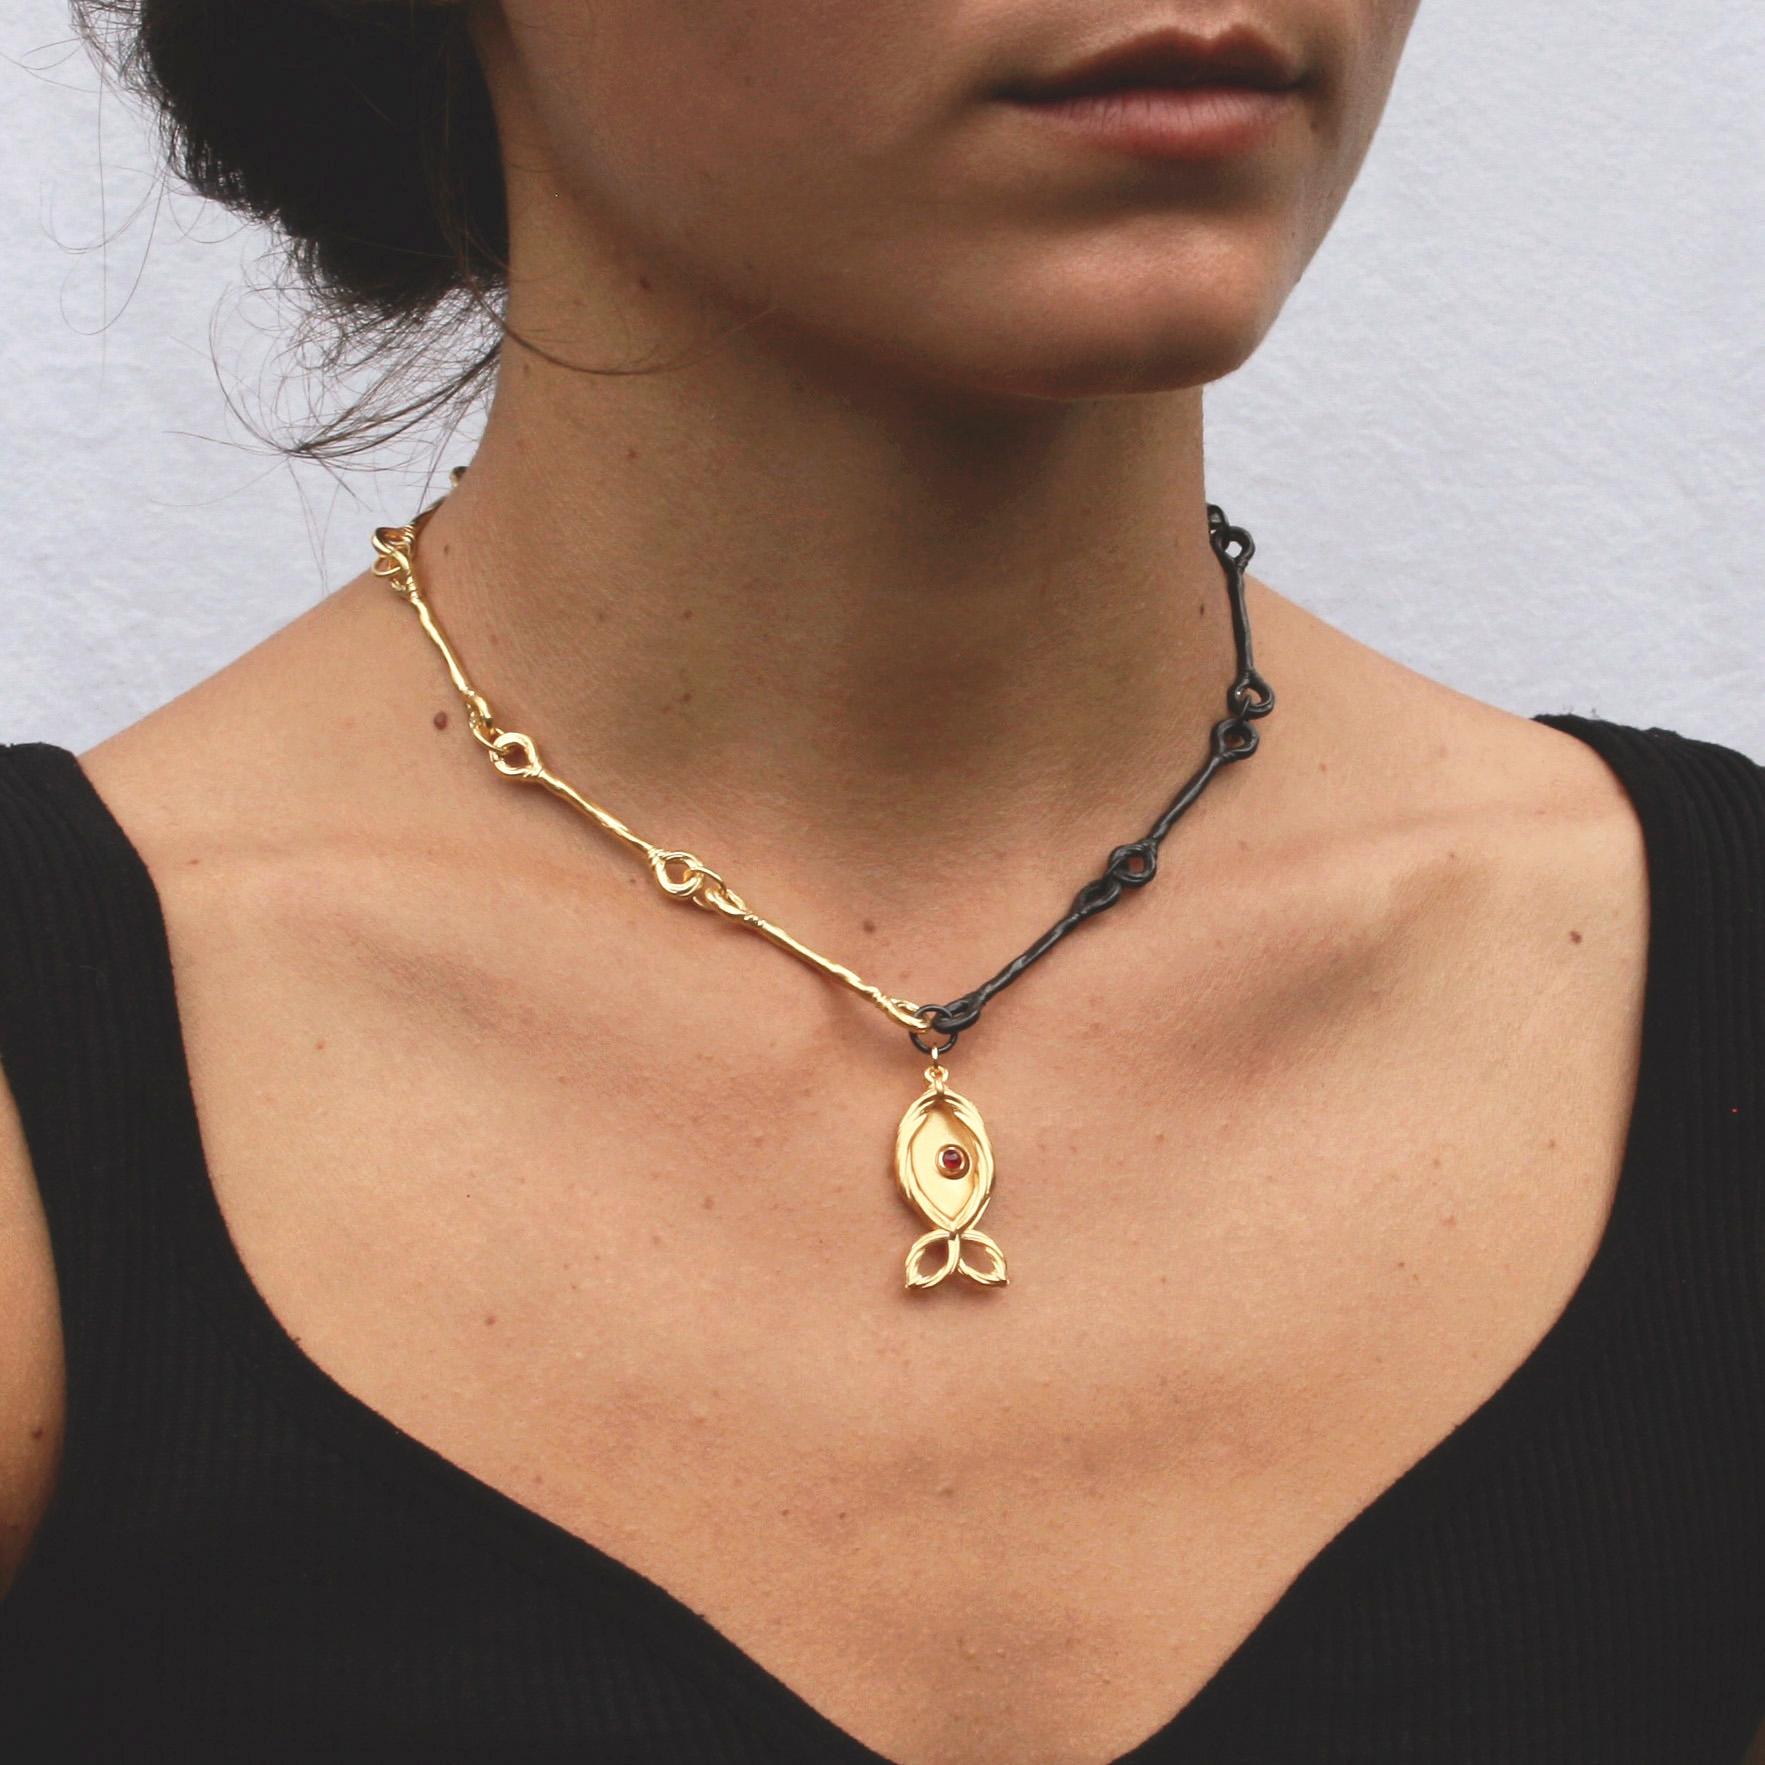 Our Two Tone Fish Choker is a striking embodiment of unity and togetherness. With one side plated in radiant gold and the other adorned with oxidized silver, it gracefully bridges the divide between contrasting elements. The centerpiece is a fish